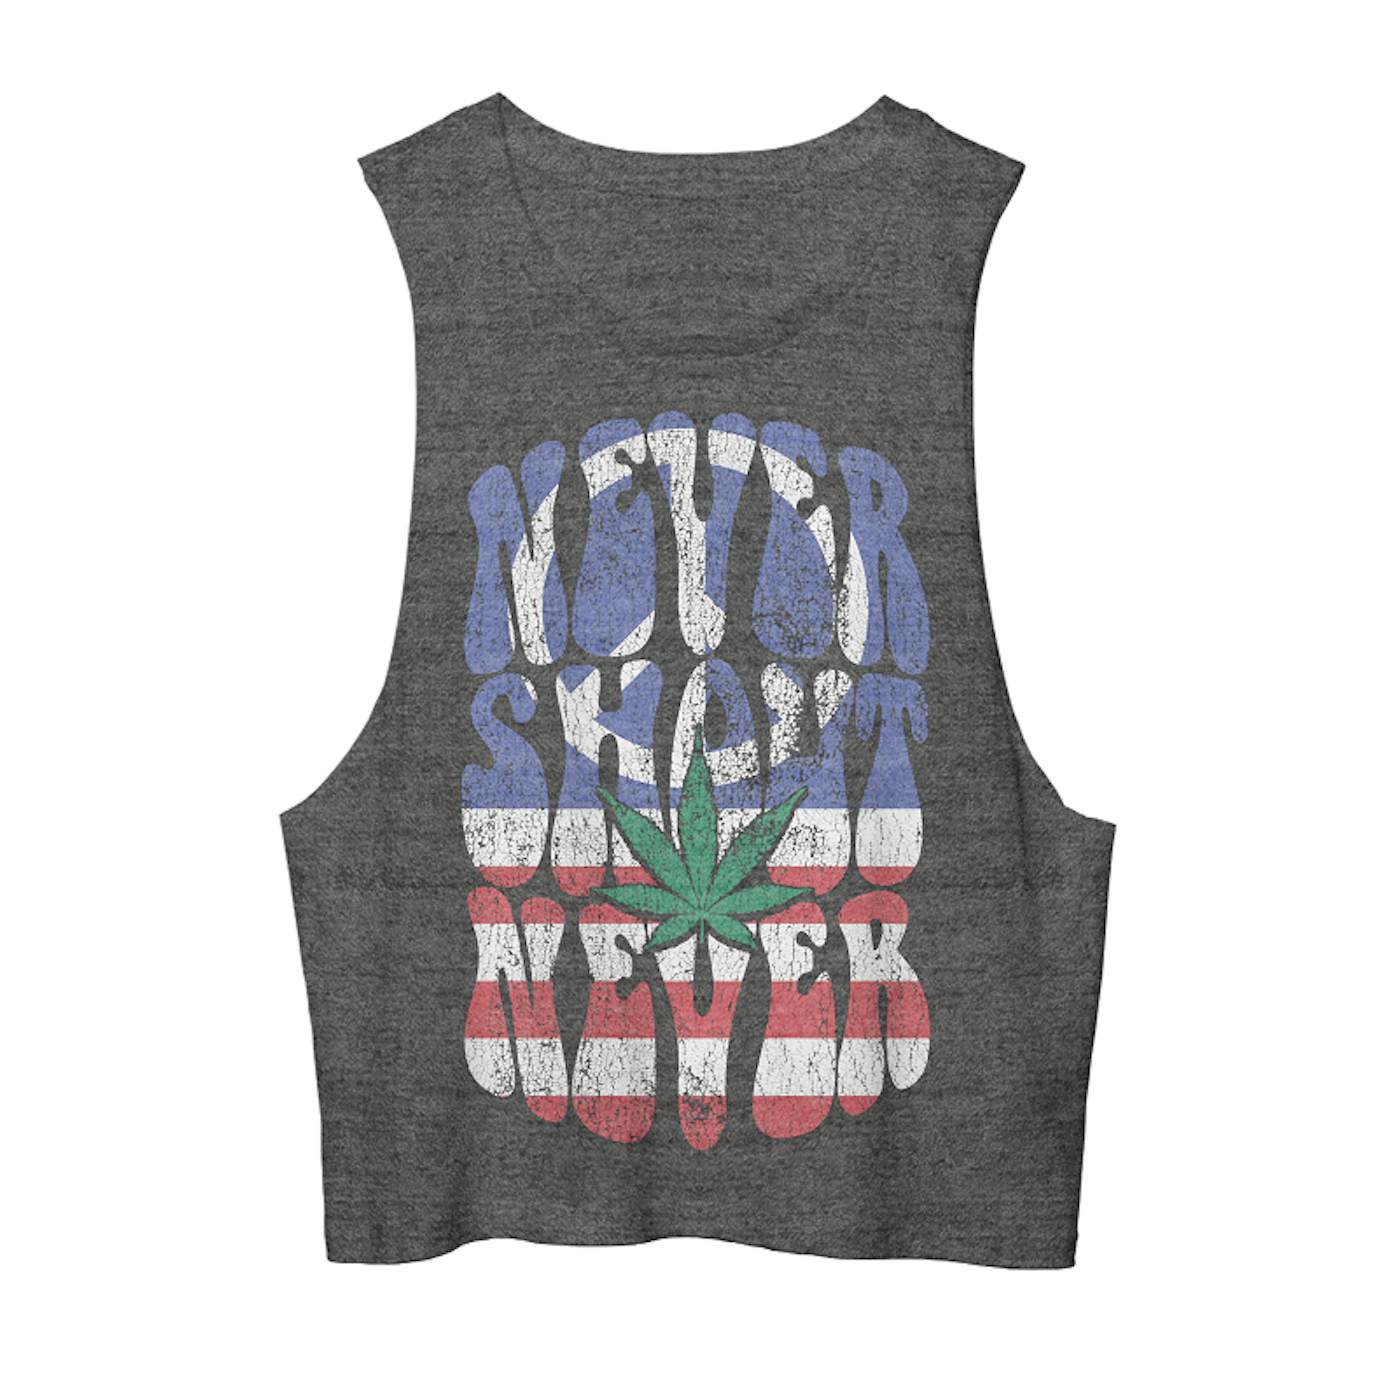 Never Shout Never Peace, Weed Flag Cutoff Tank